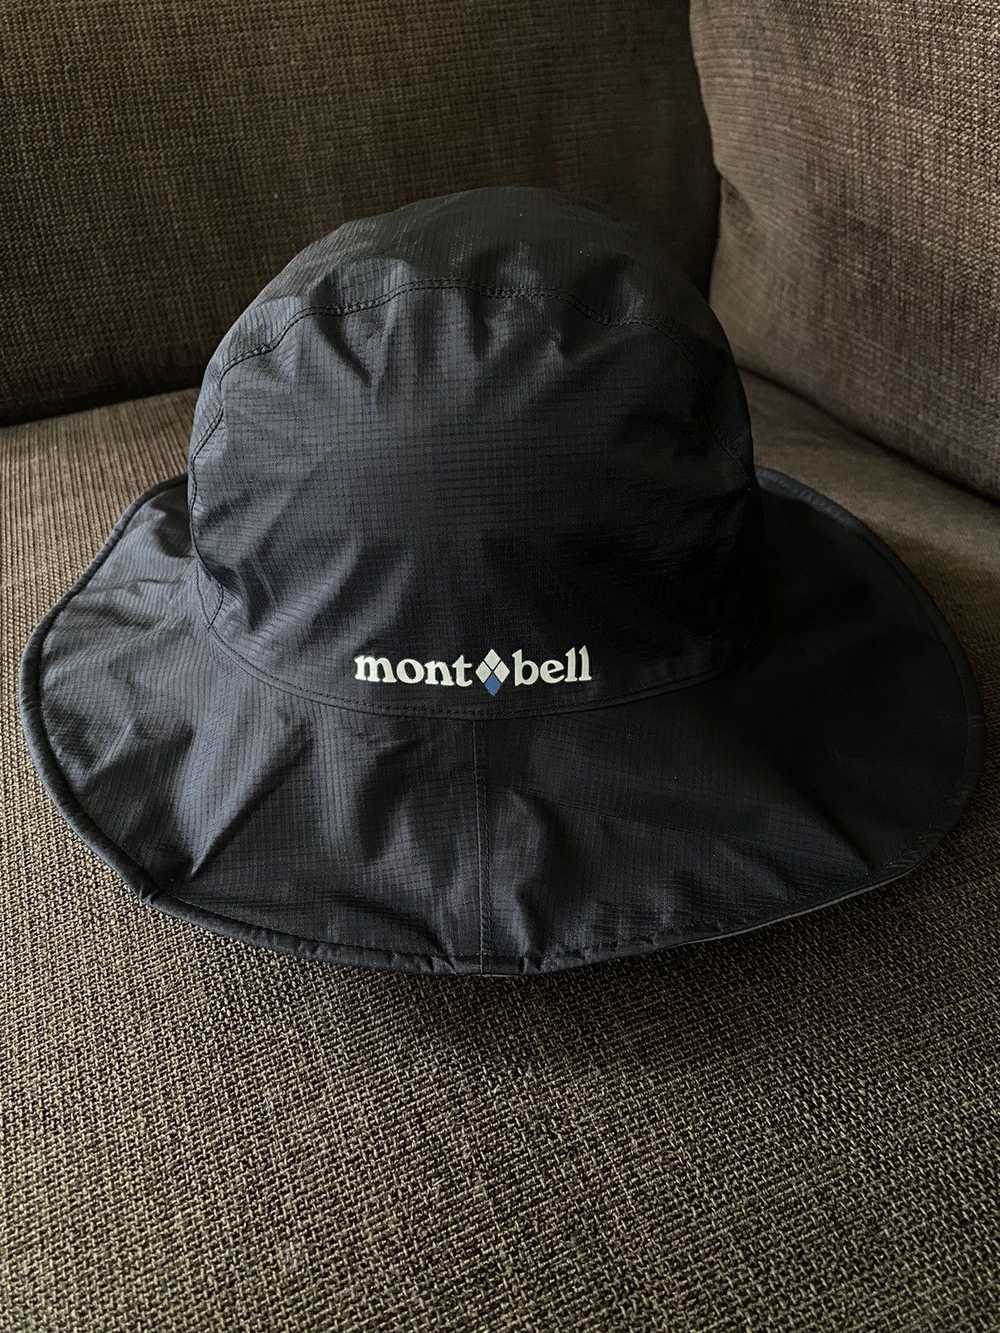 Goretex × Montbell × Outdoor Cap VTG Montbell Out… - image 1